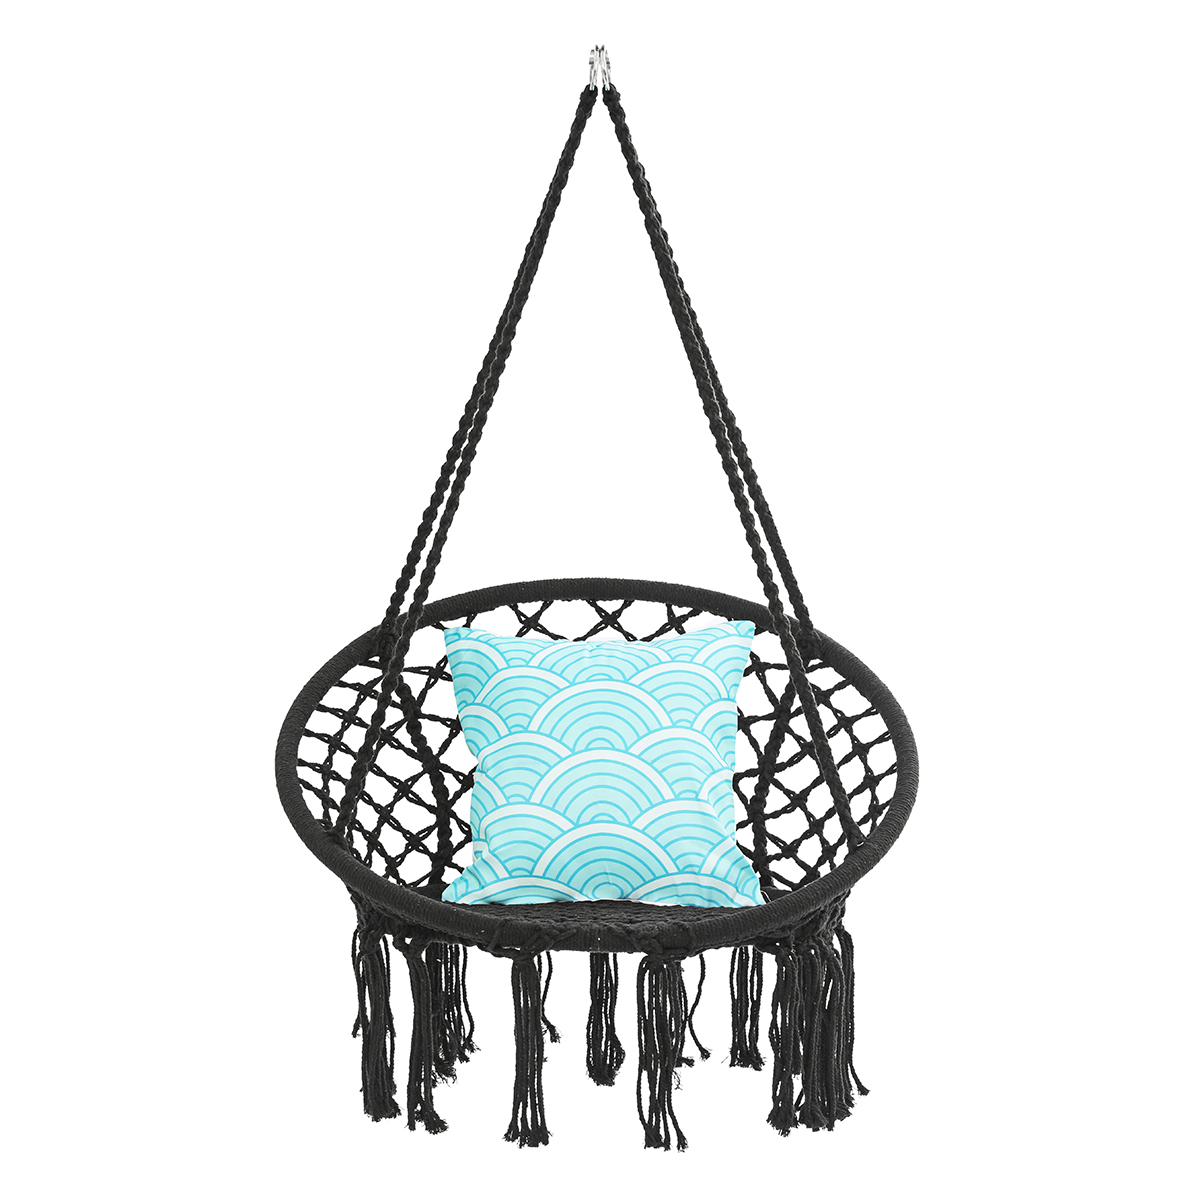 AUGIENB Hammock Chair Hanging Chairs Mesh Woven Macrame Swing Garden Indoor Outdoor Home Decor,100/120/150KG Load-Bearing Christmas Gift - image 4 of 7